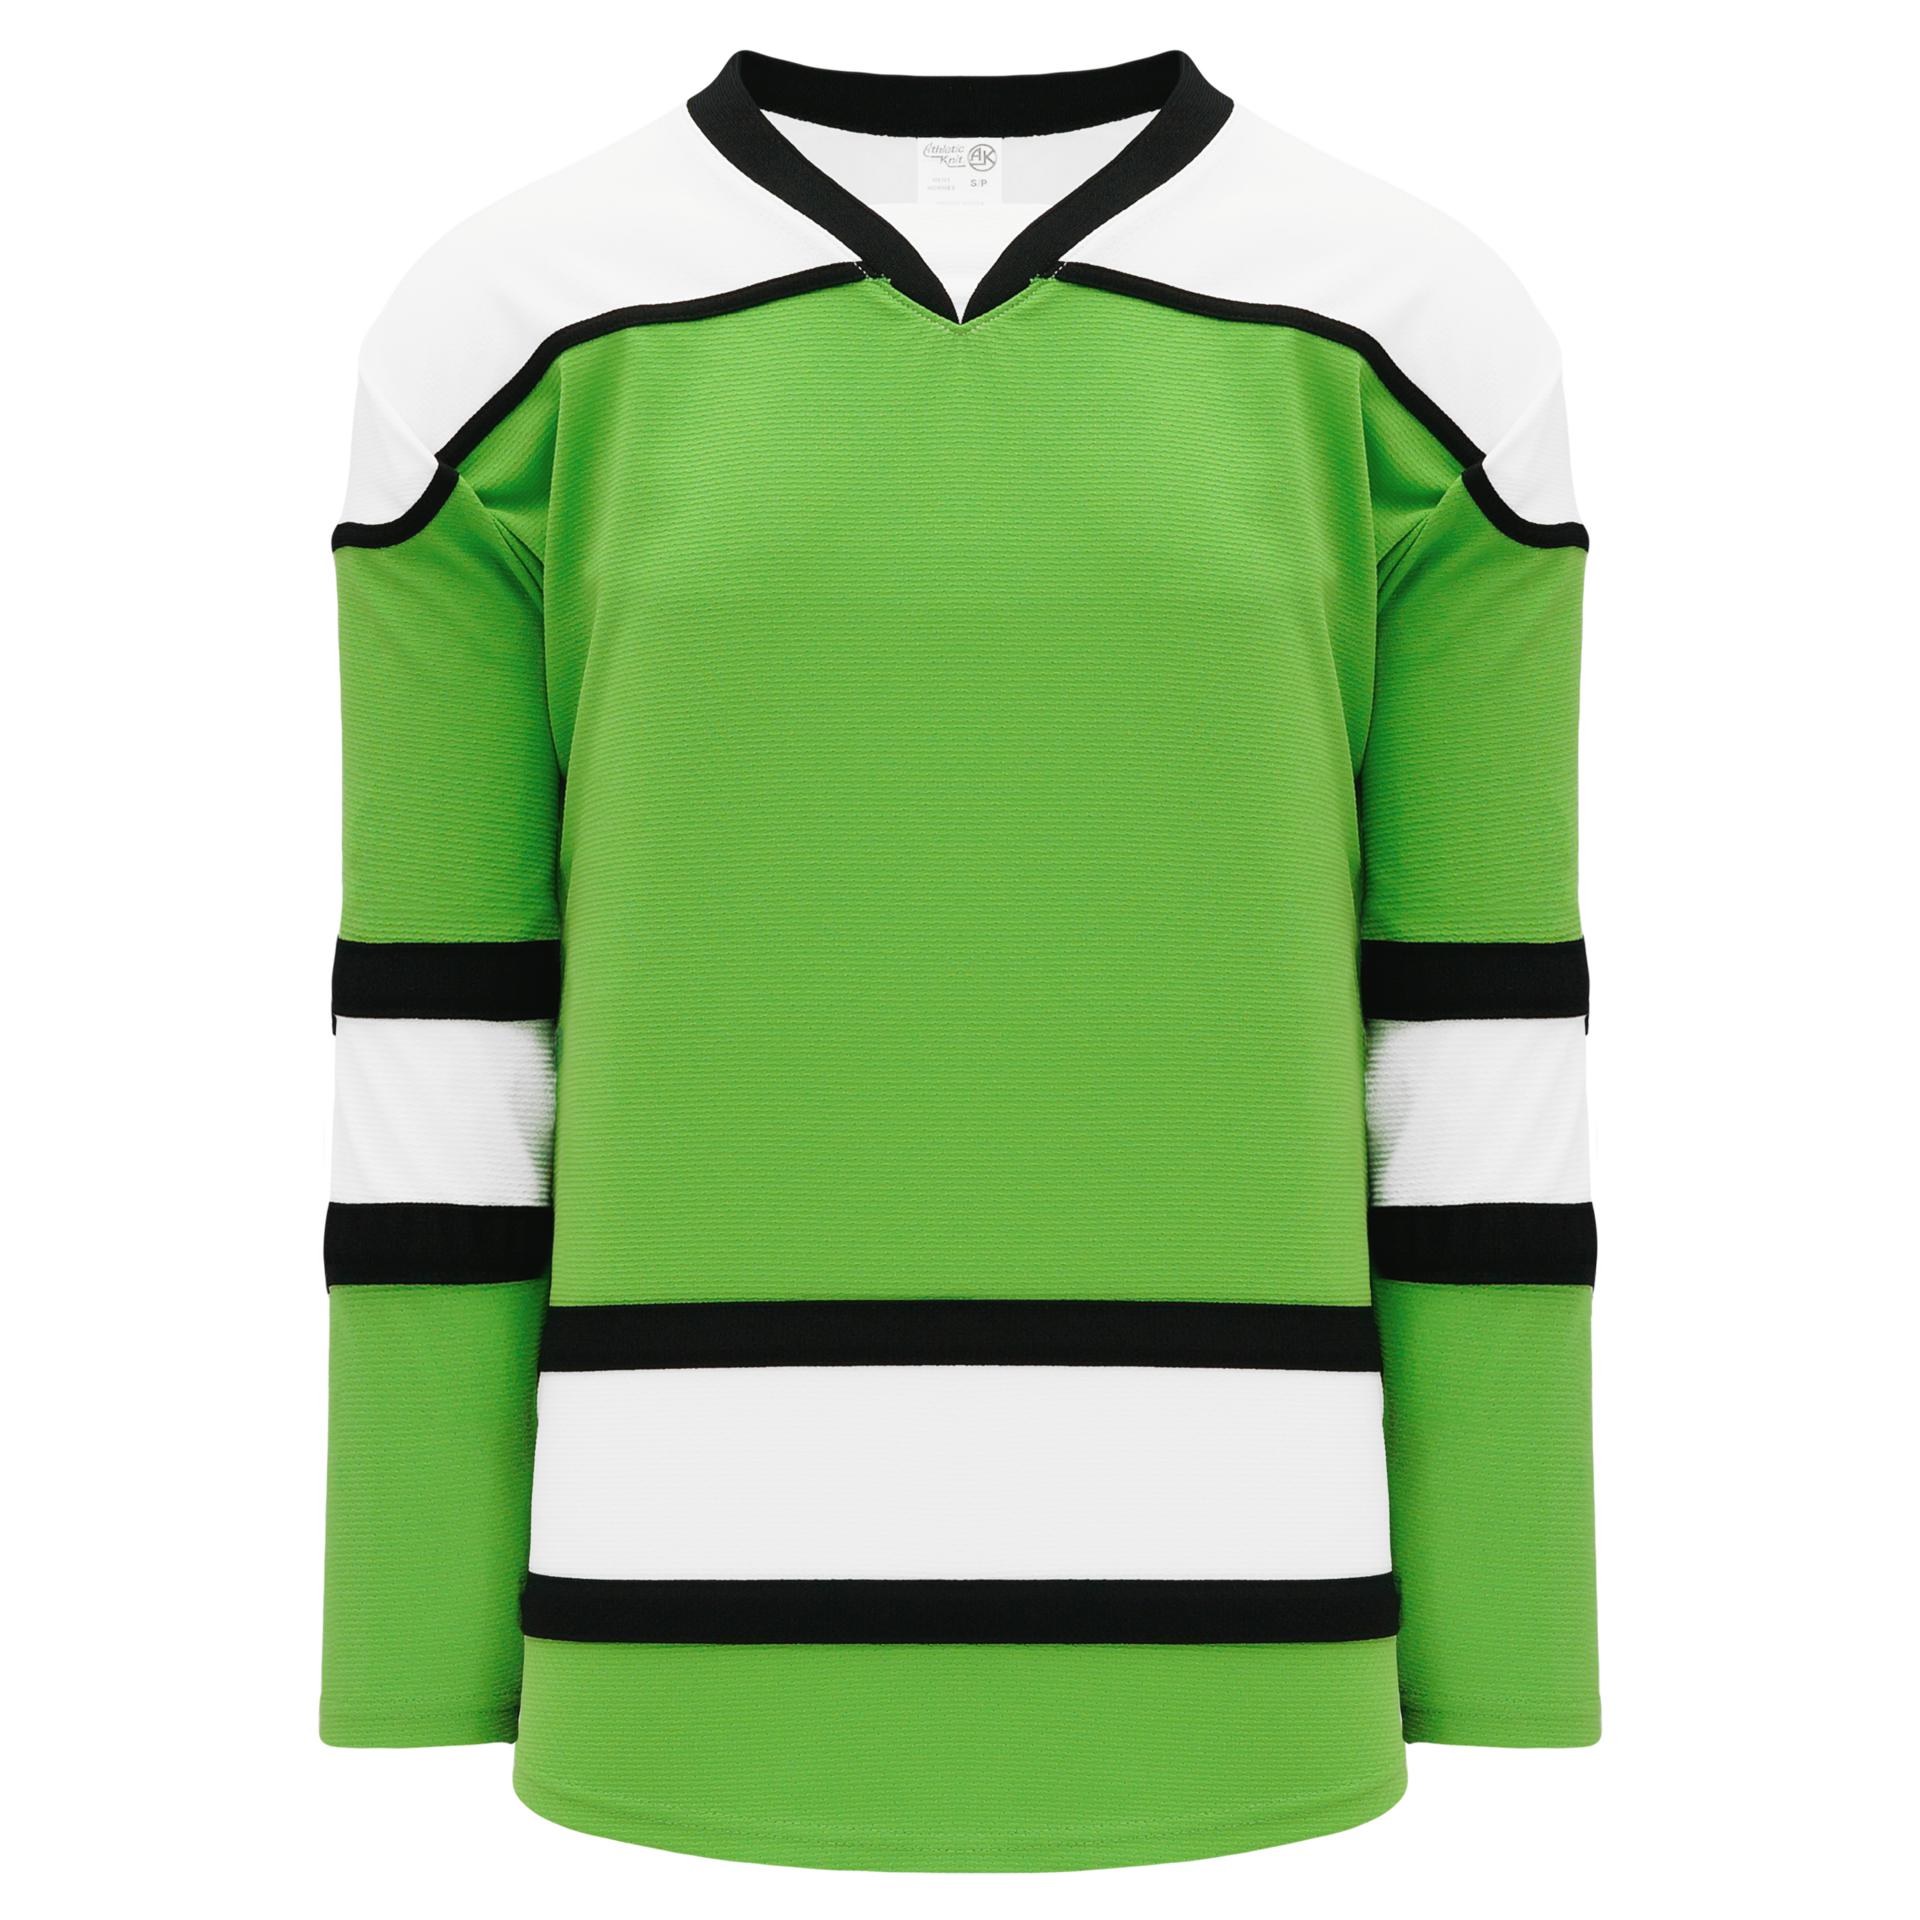 black and lime green jersey